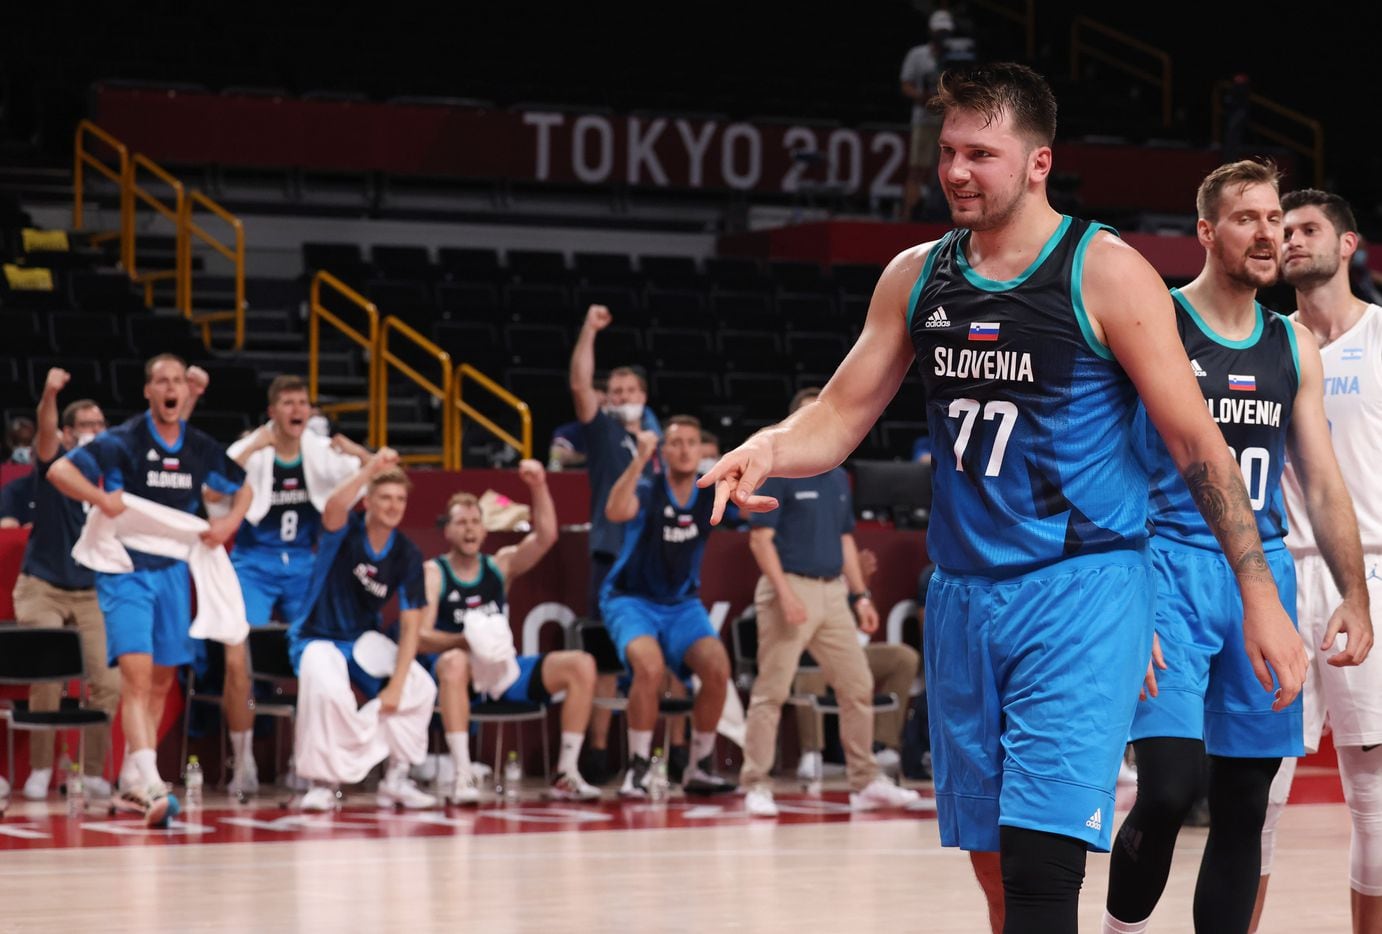 Slovenia’s Luka Doncic (77) signals a made basket after he was fouled on a basket in the first half of play against Argentina during the postponed 2020 Tokyo Olympics at Saitama Super Arena on Monday, July 26, 2021, in Saitama, Japan. Slovenia defeated Argentina 118-100. (Vernon Bryant/The Dallas Morning News)